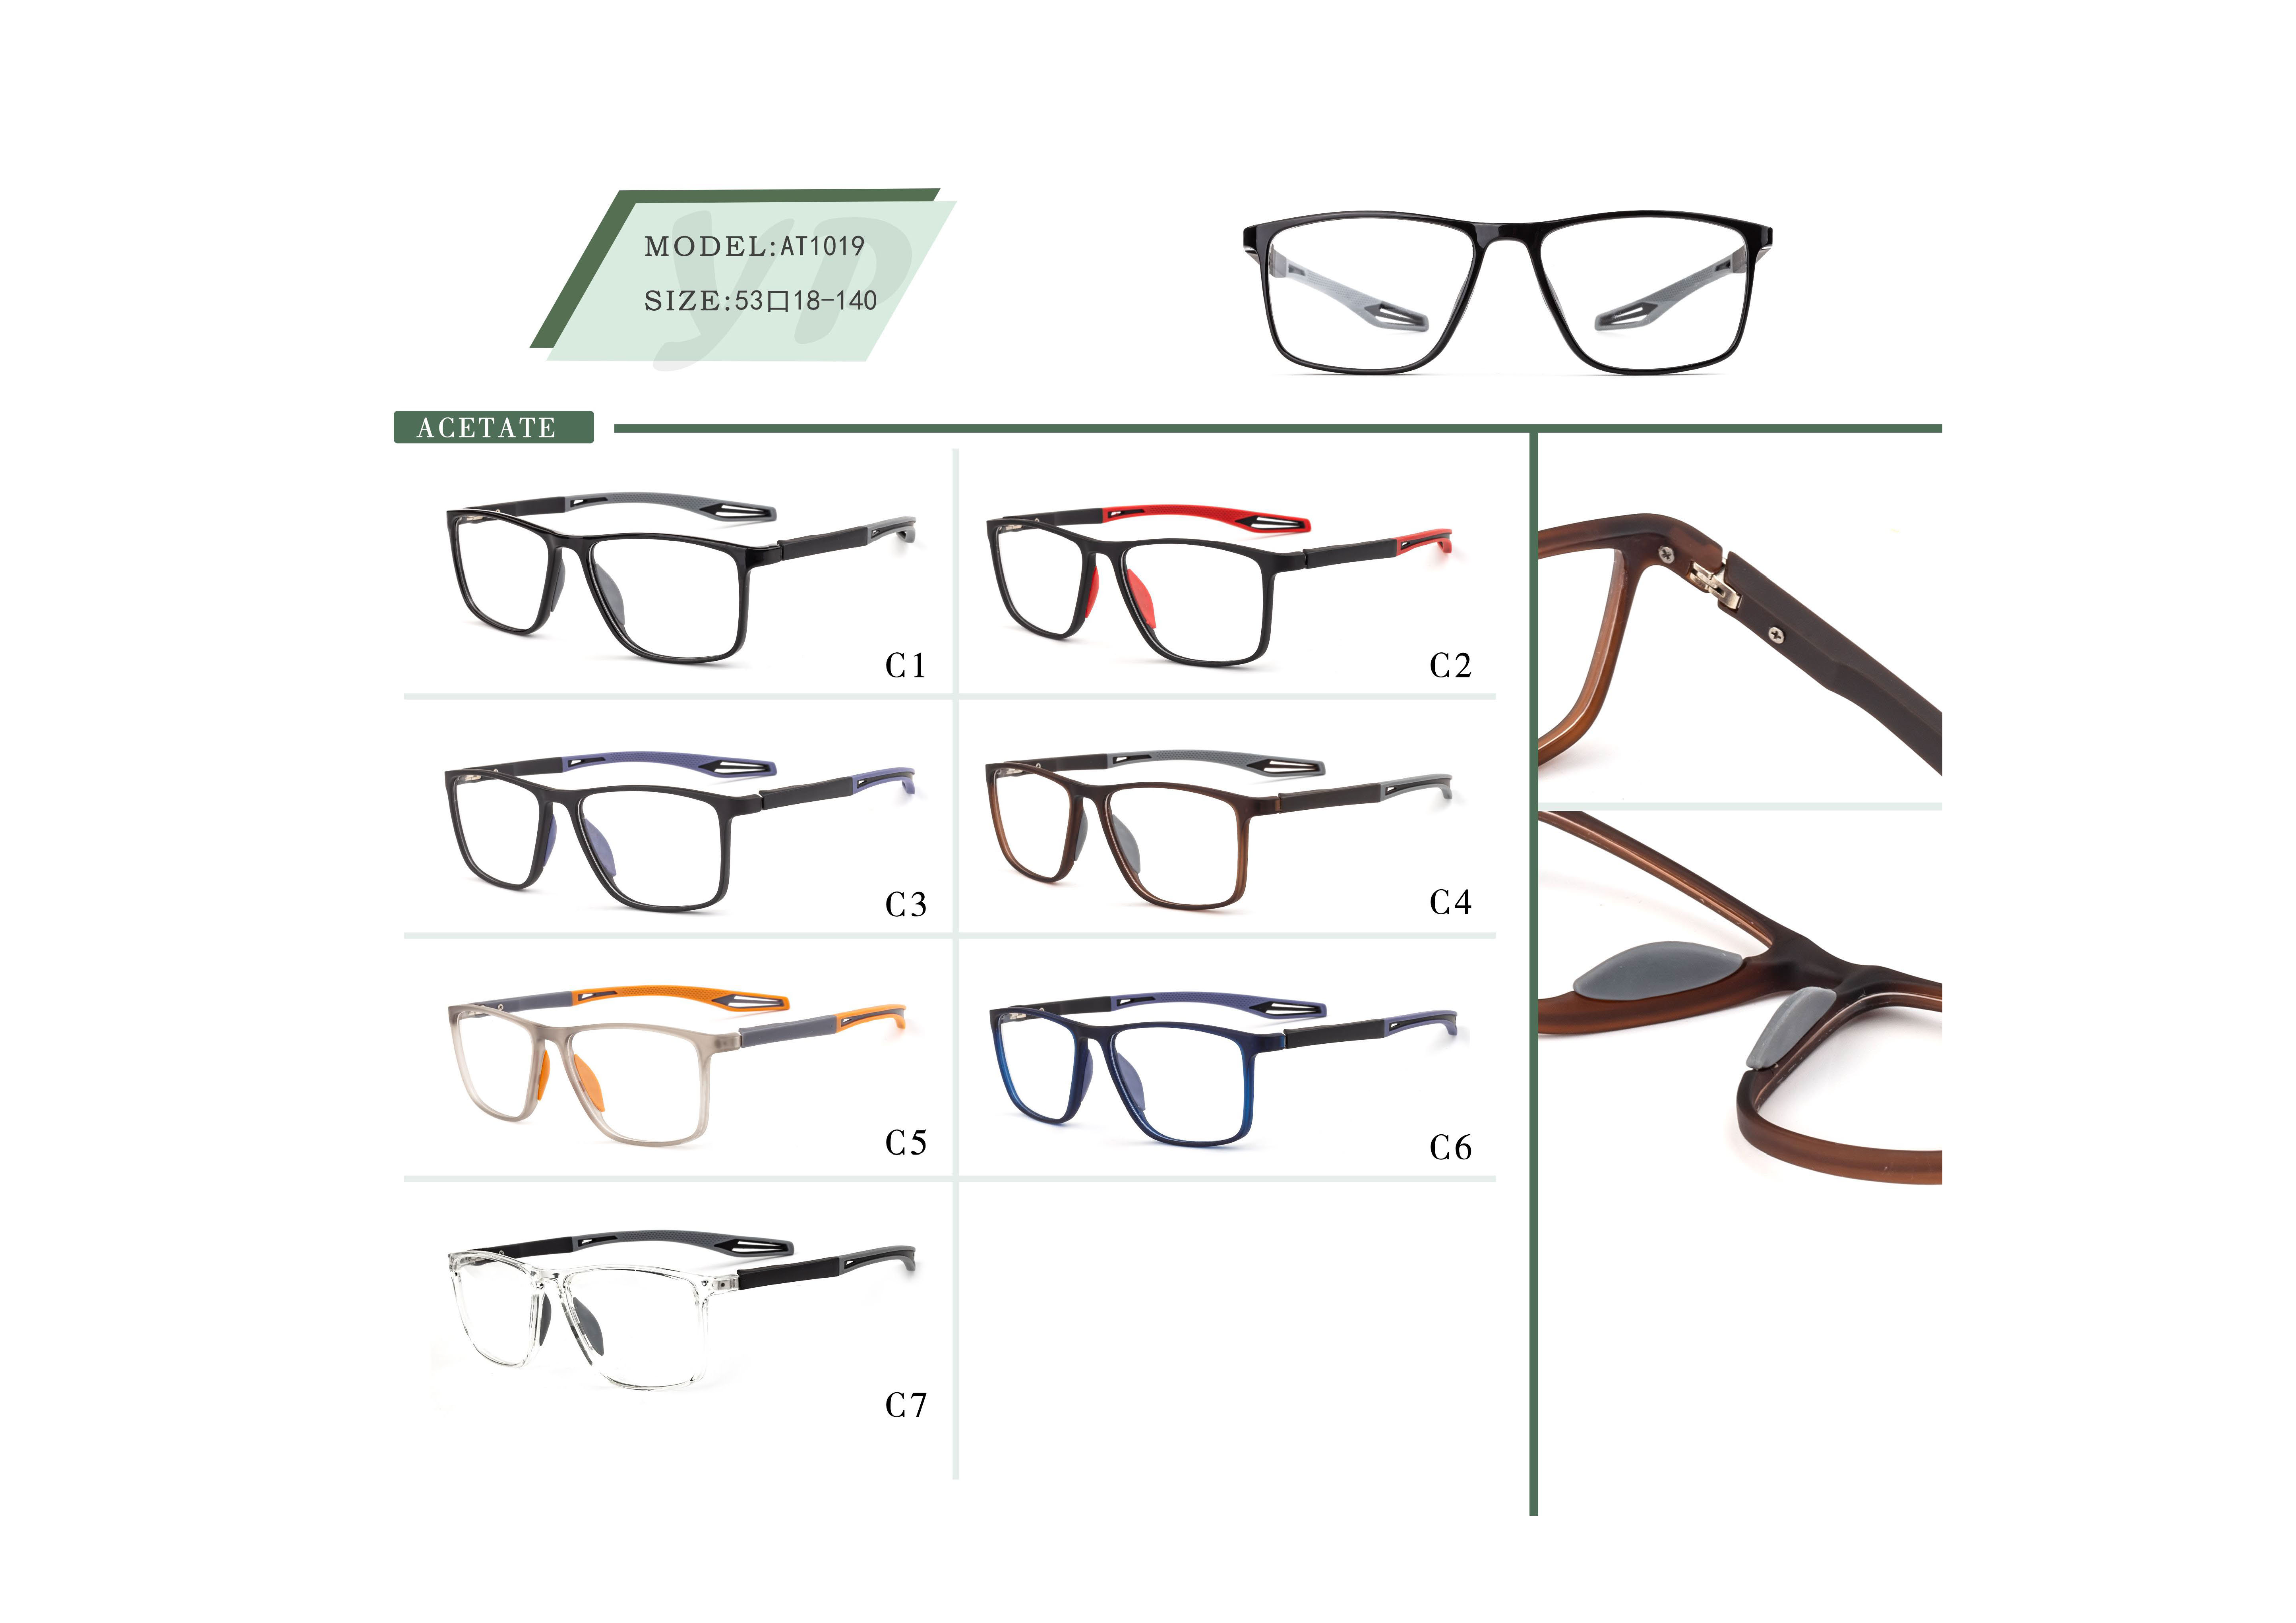 Sports TR90 Glasses Frames with Spring Hinges_页面_1